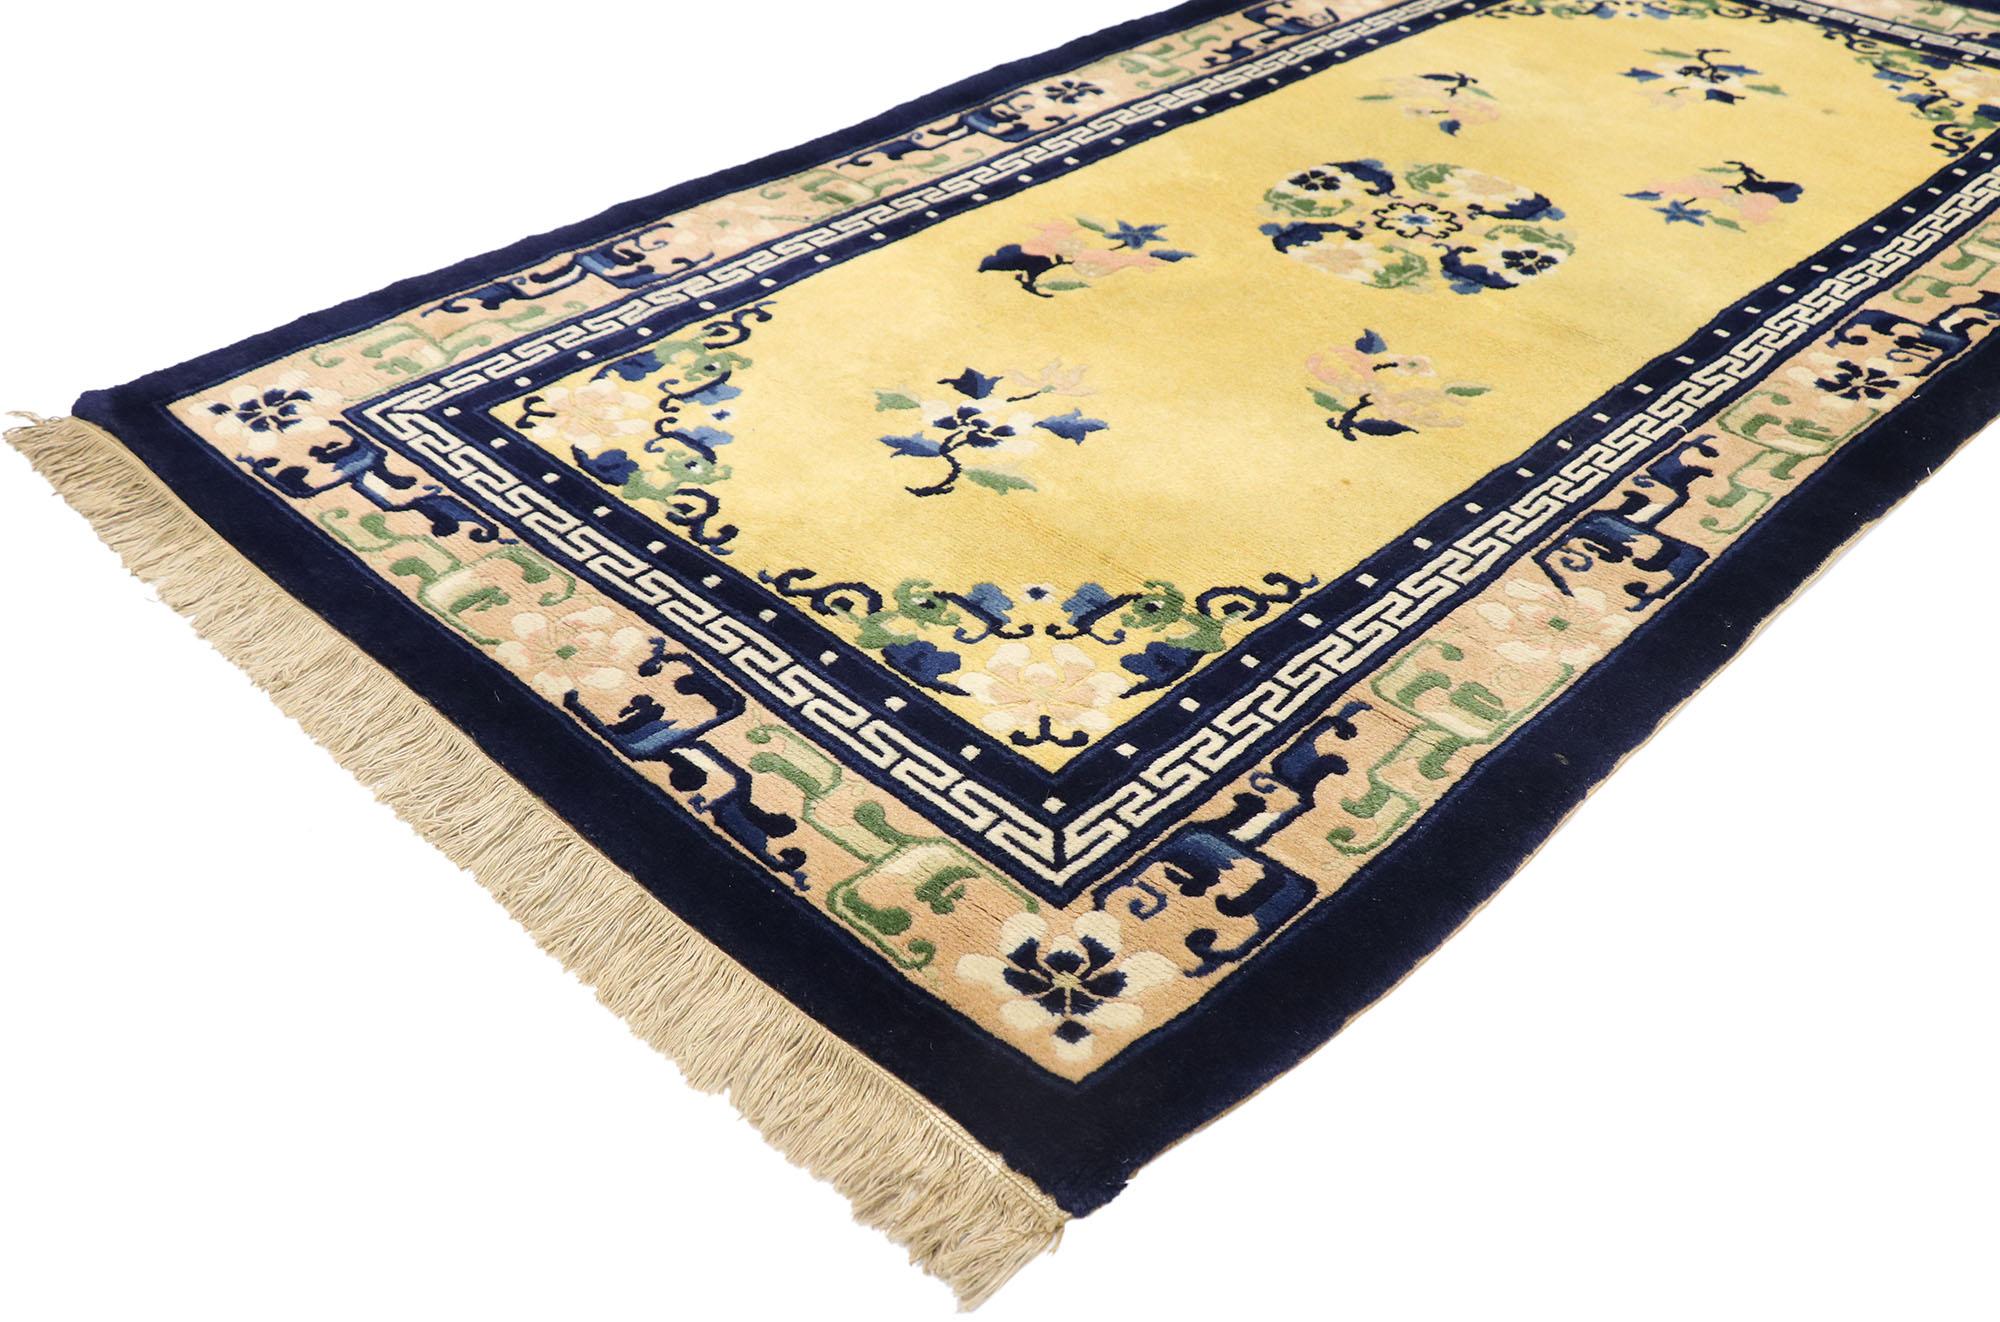 77590, antique Chinese Peking rug with Romantic Chinoiserie style. This hand knotted wool antique Chinese Peking rug features a rounded open medallion decorated with a lotus blossom, peonies, and leafy tendrils floating in the center of an abrashed